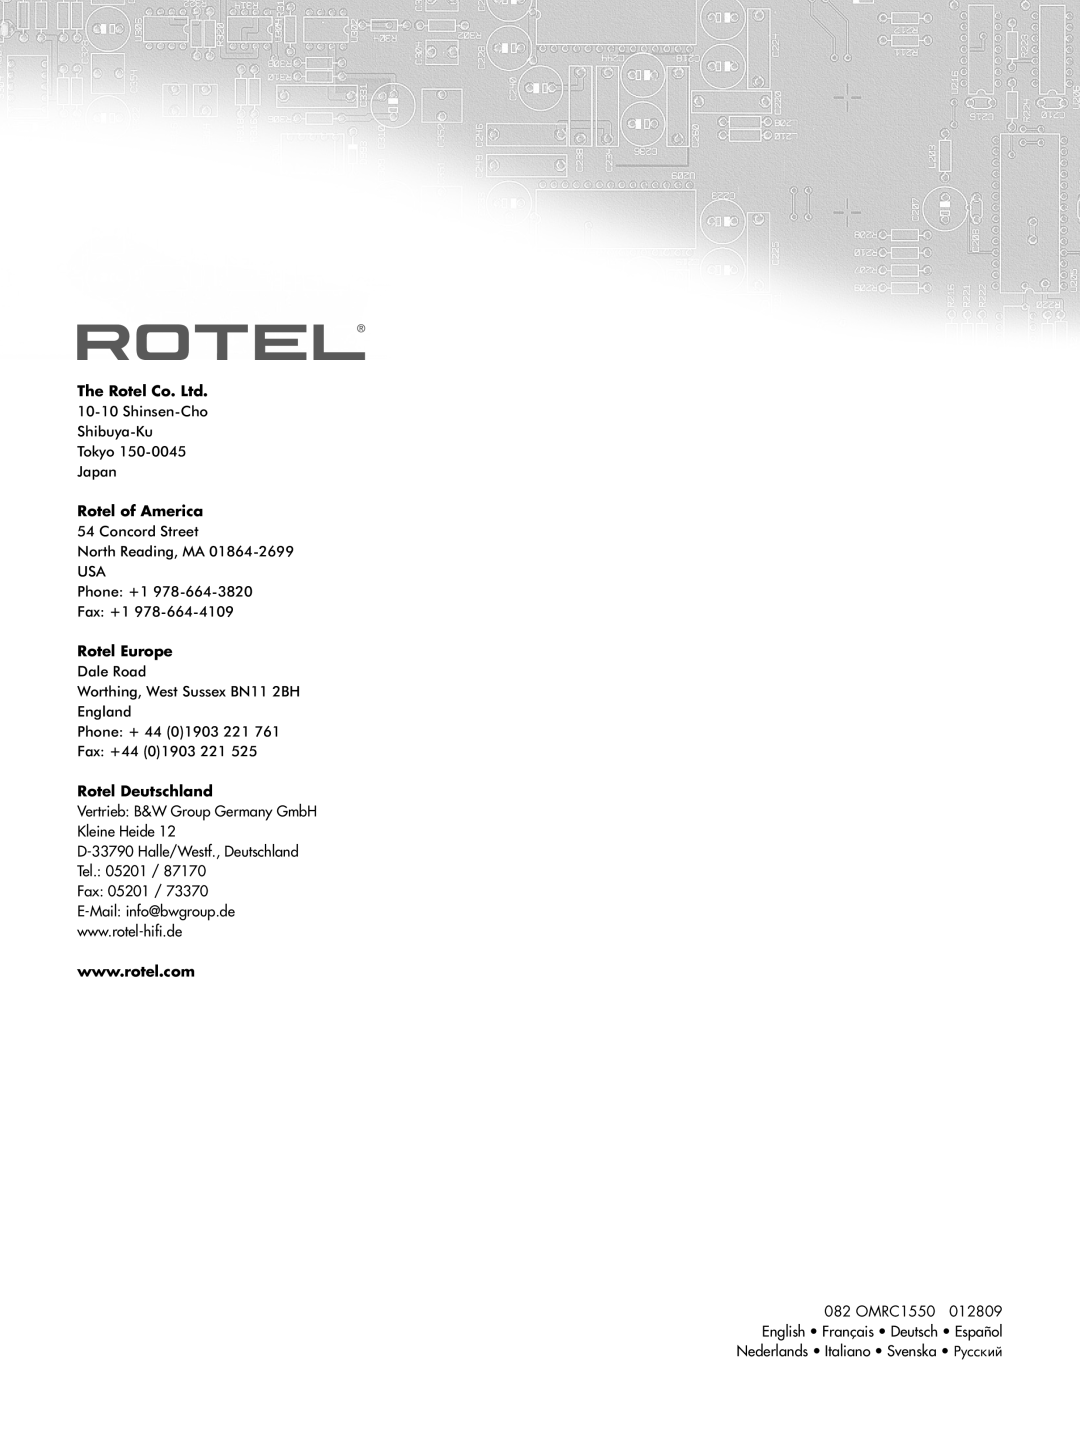 Rotel RC-1550 owner manual Rotel of America, Rotel Europe, Rotel Deutschland 